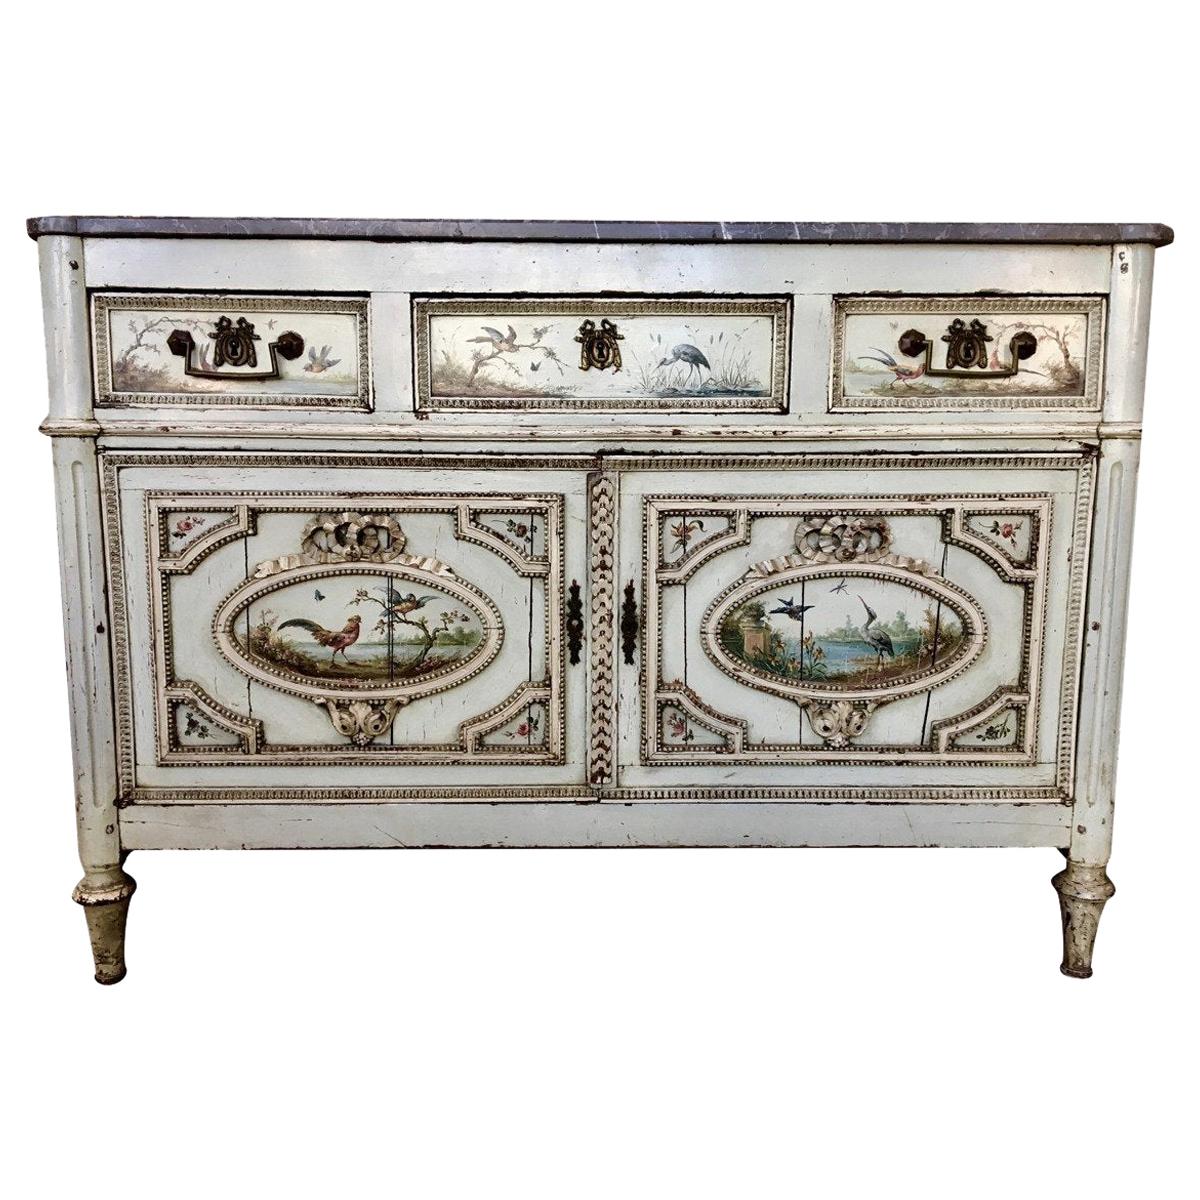 Cabinet or Commode with Marble Top, 18th Century with Hand Painted Bird Details